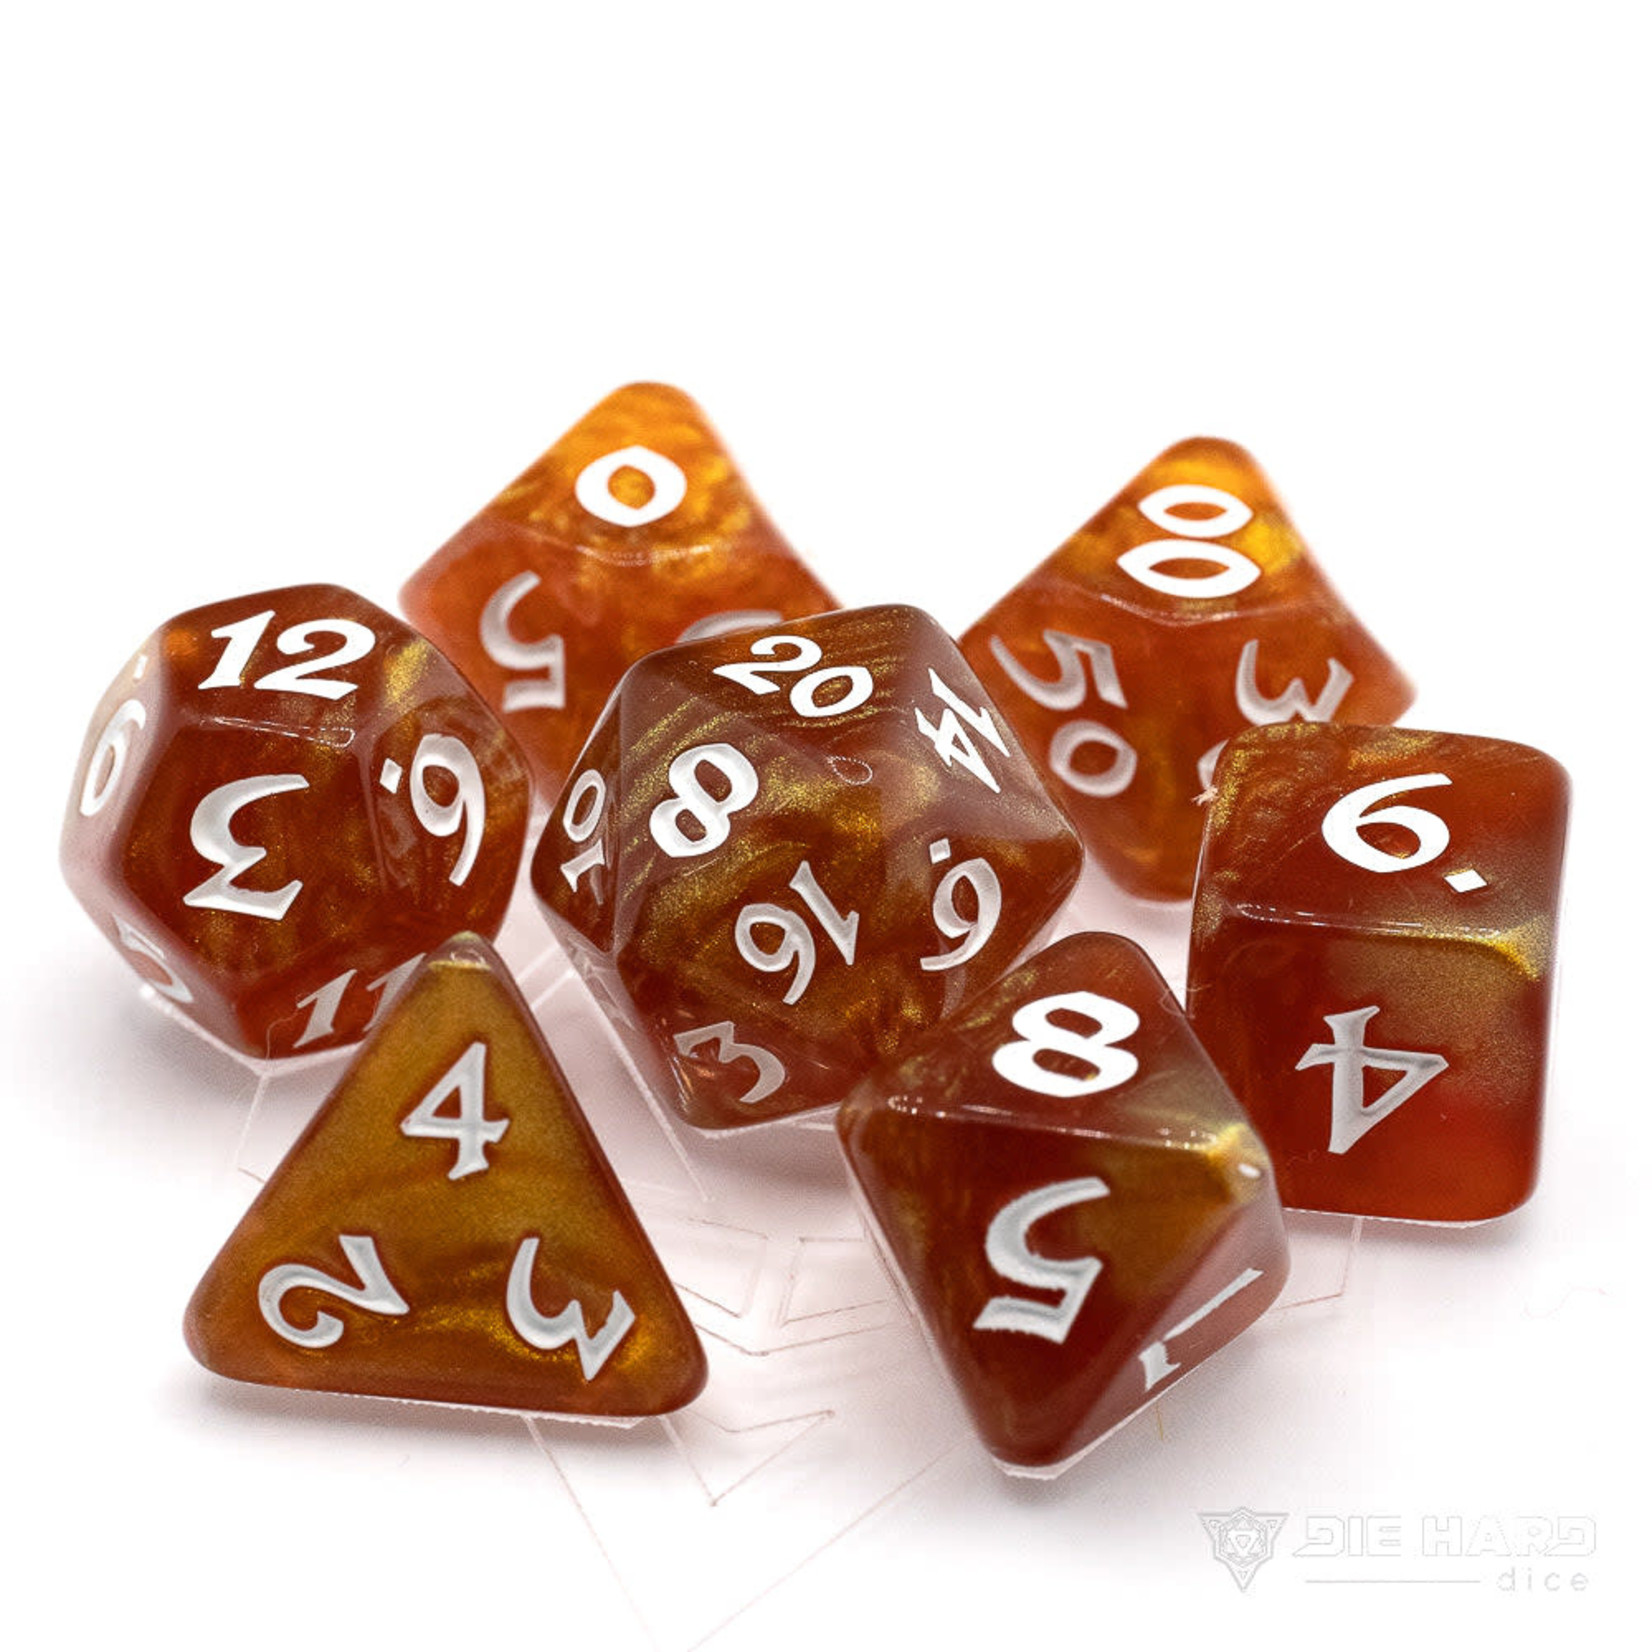 Die Hard Dice 7 Piece RPG Set - Elessia Bloodfire with White